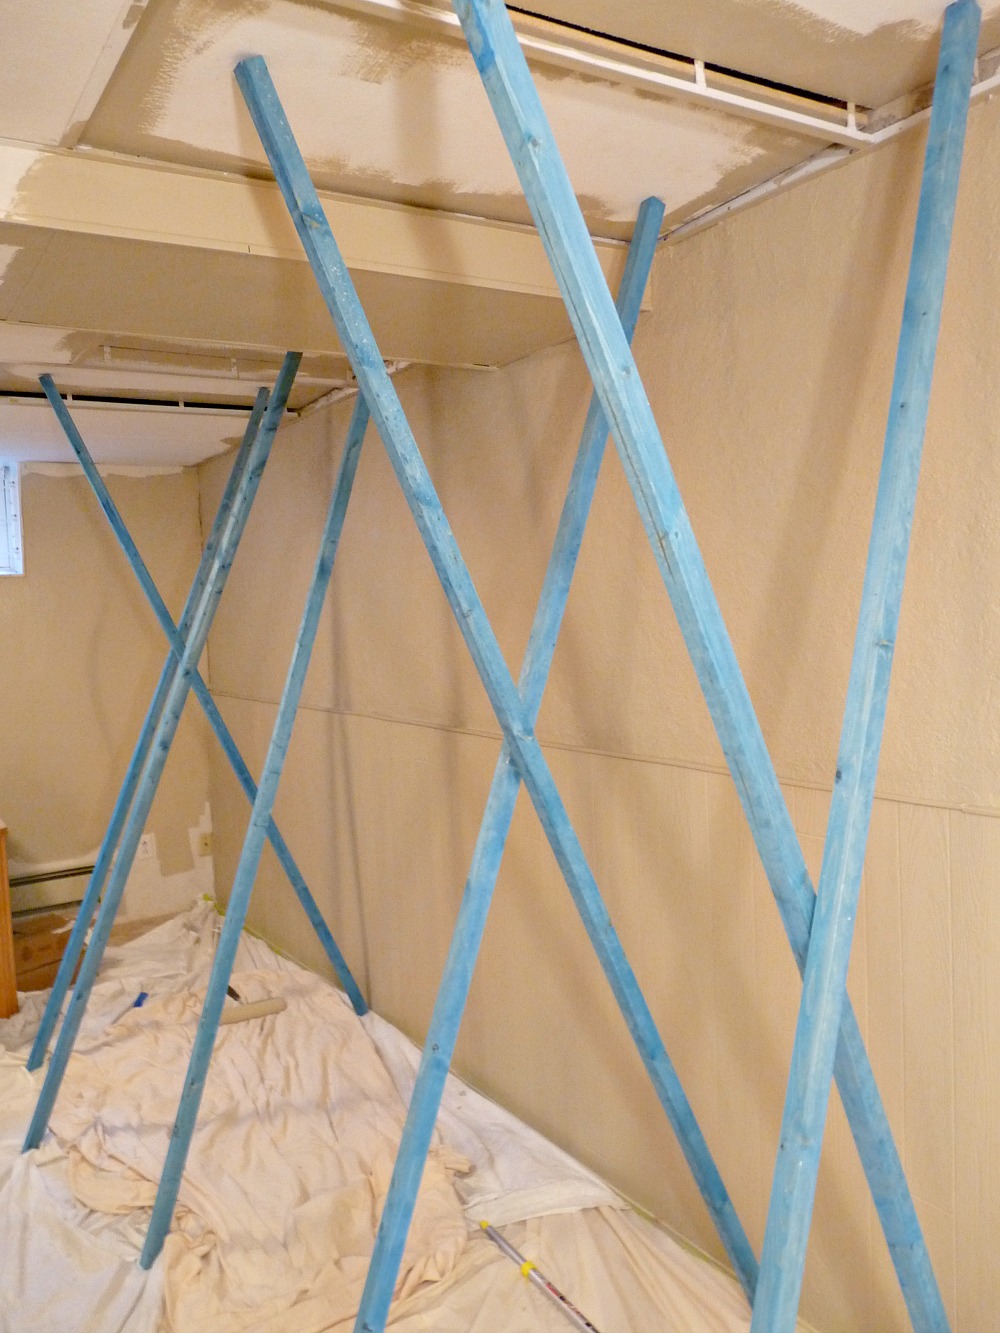 Basement Update How To Paint Drop Ceilings You Cannot